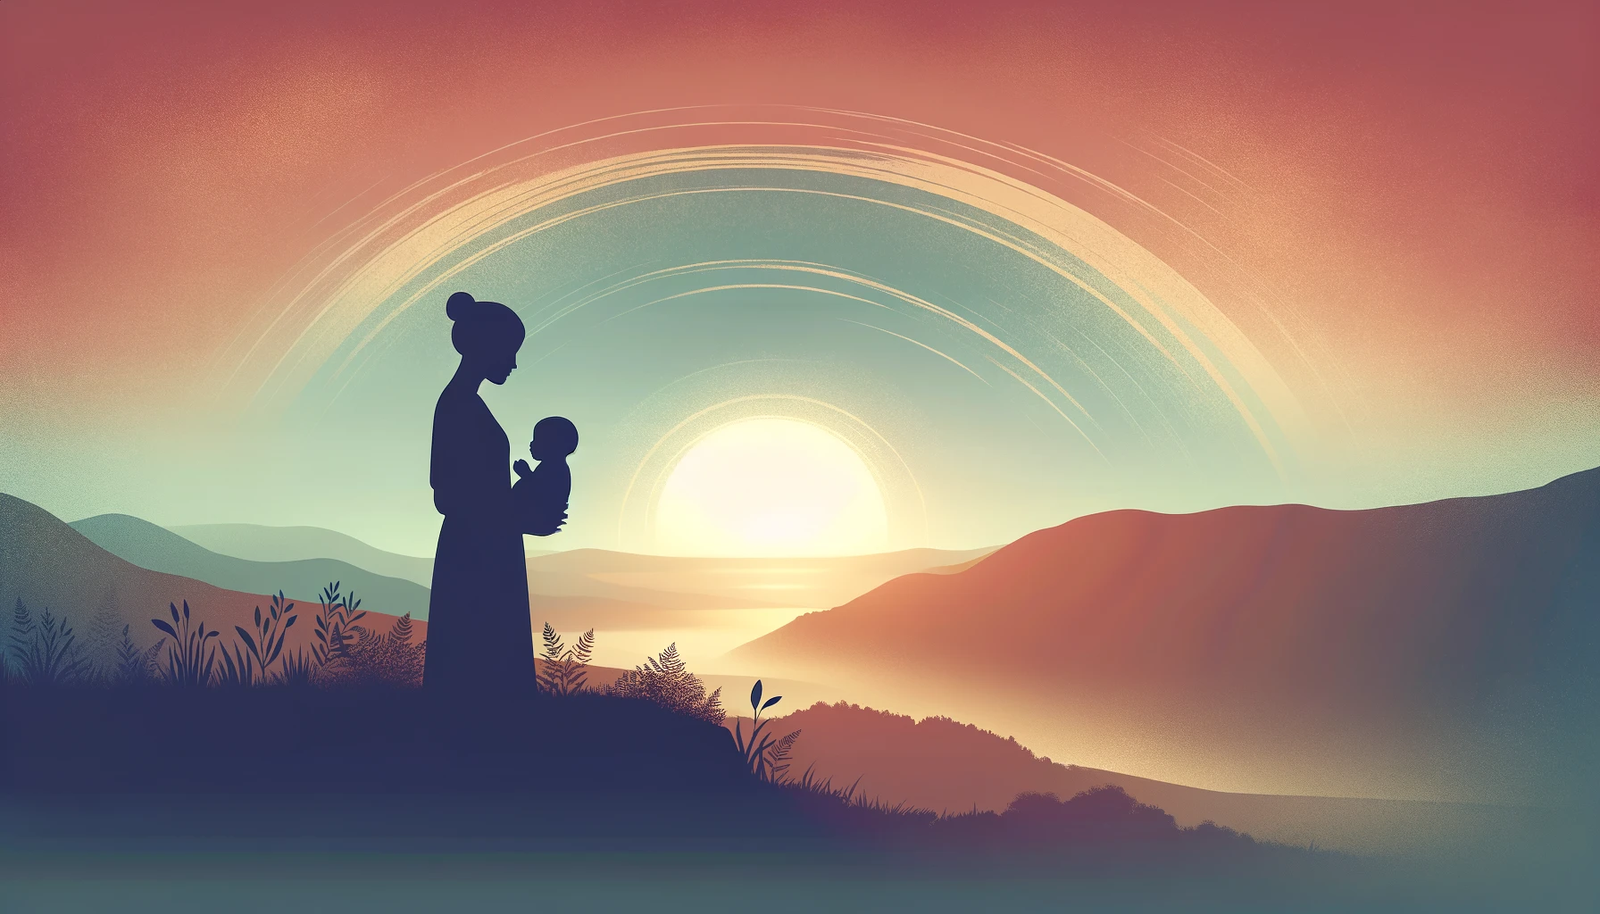 Silhouette of mother holding baby at sunrise, symbolizing hope and strength in postpartum depression recovery.